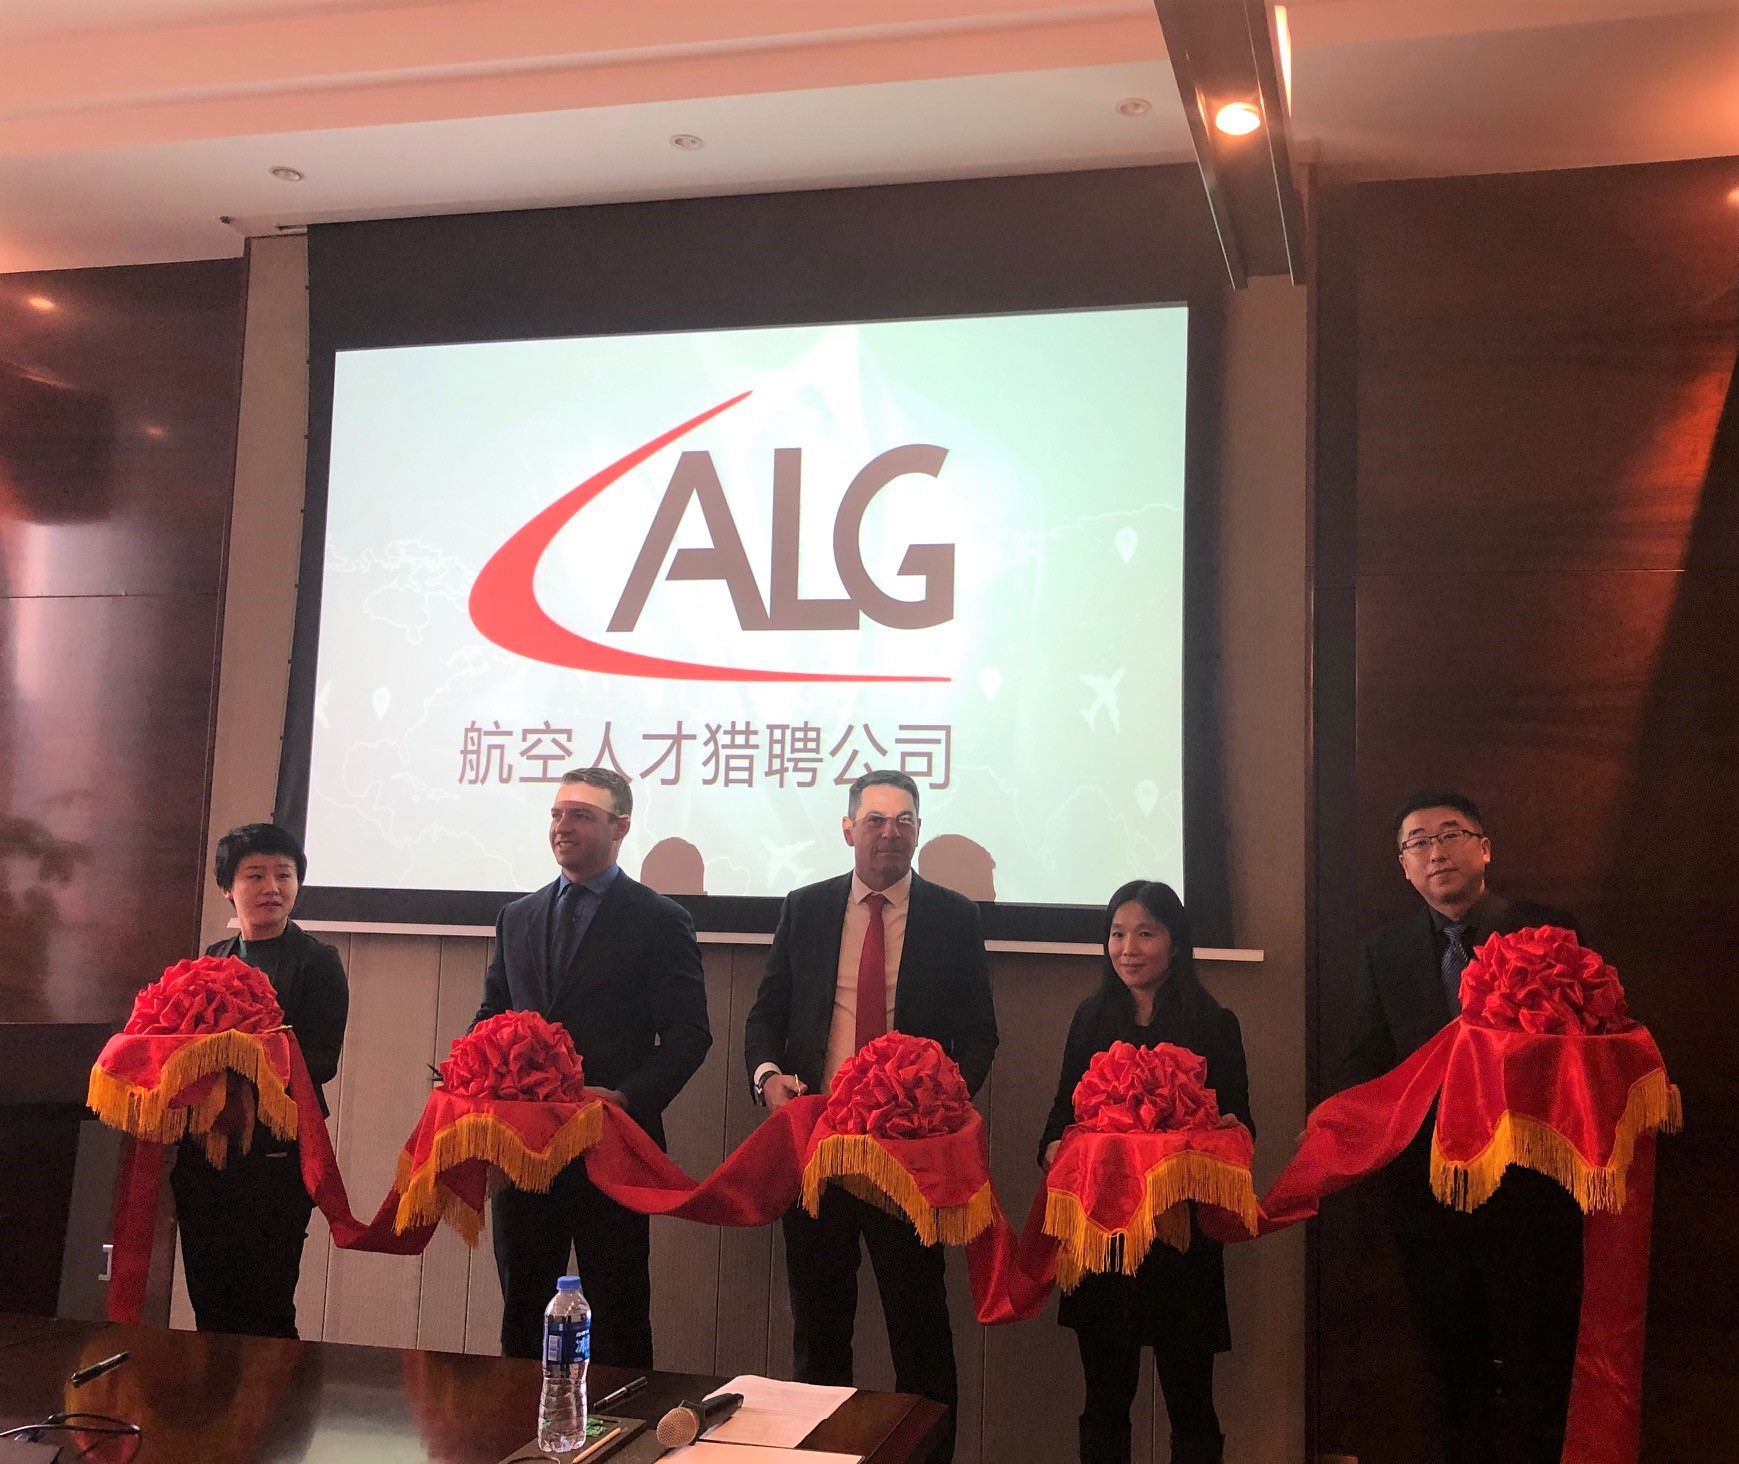 ALG Signs New Joint Venture With BCAT